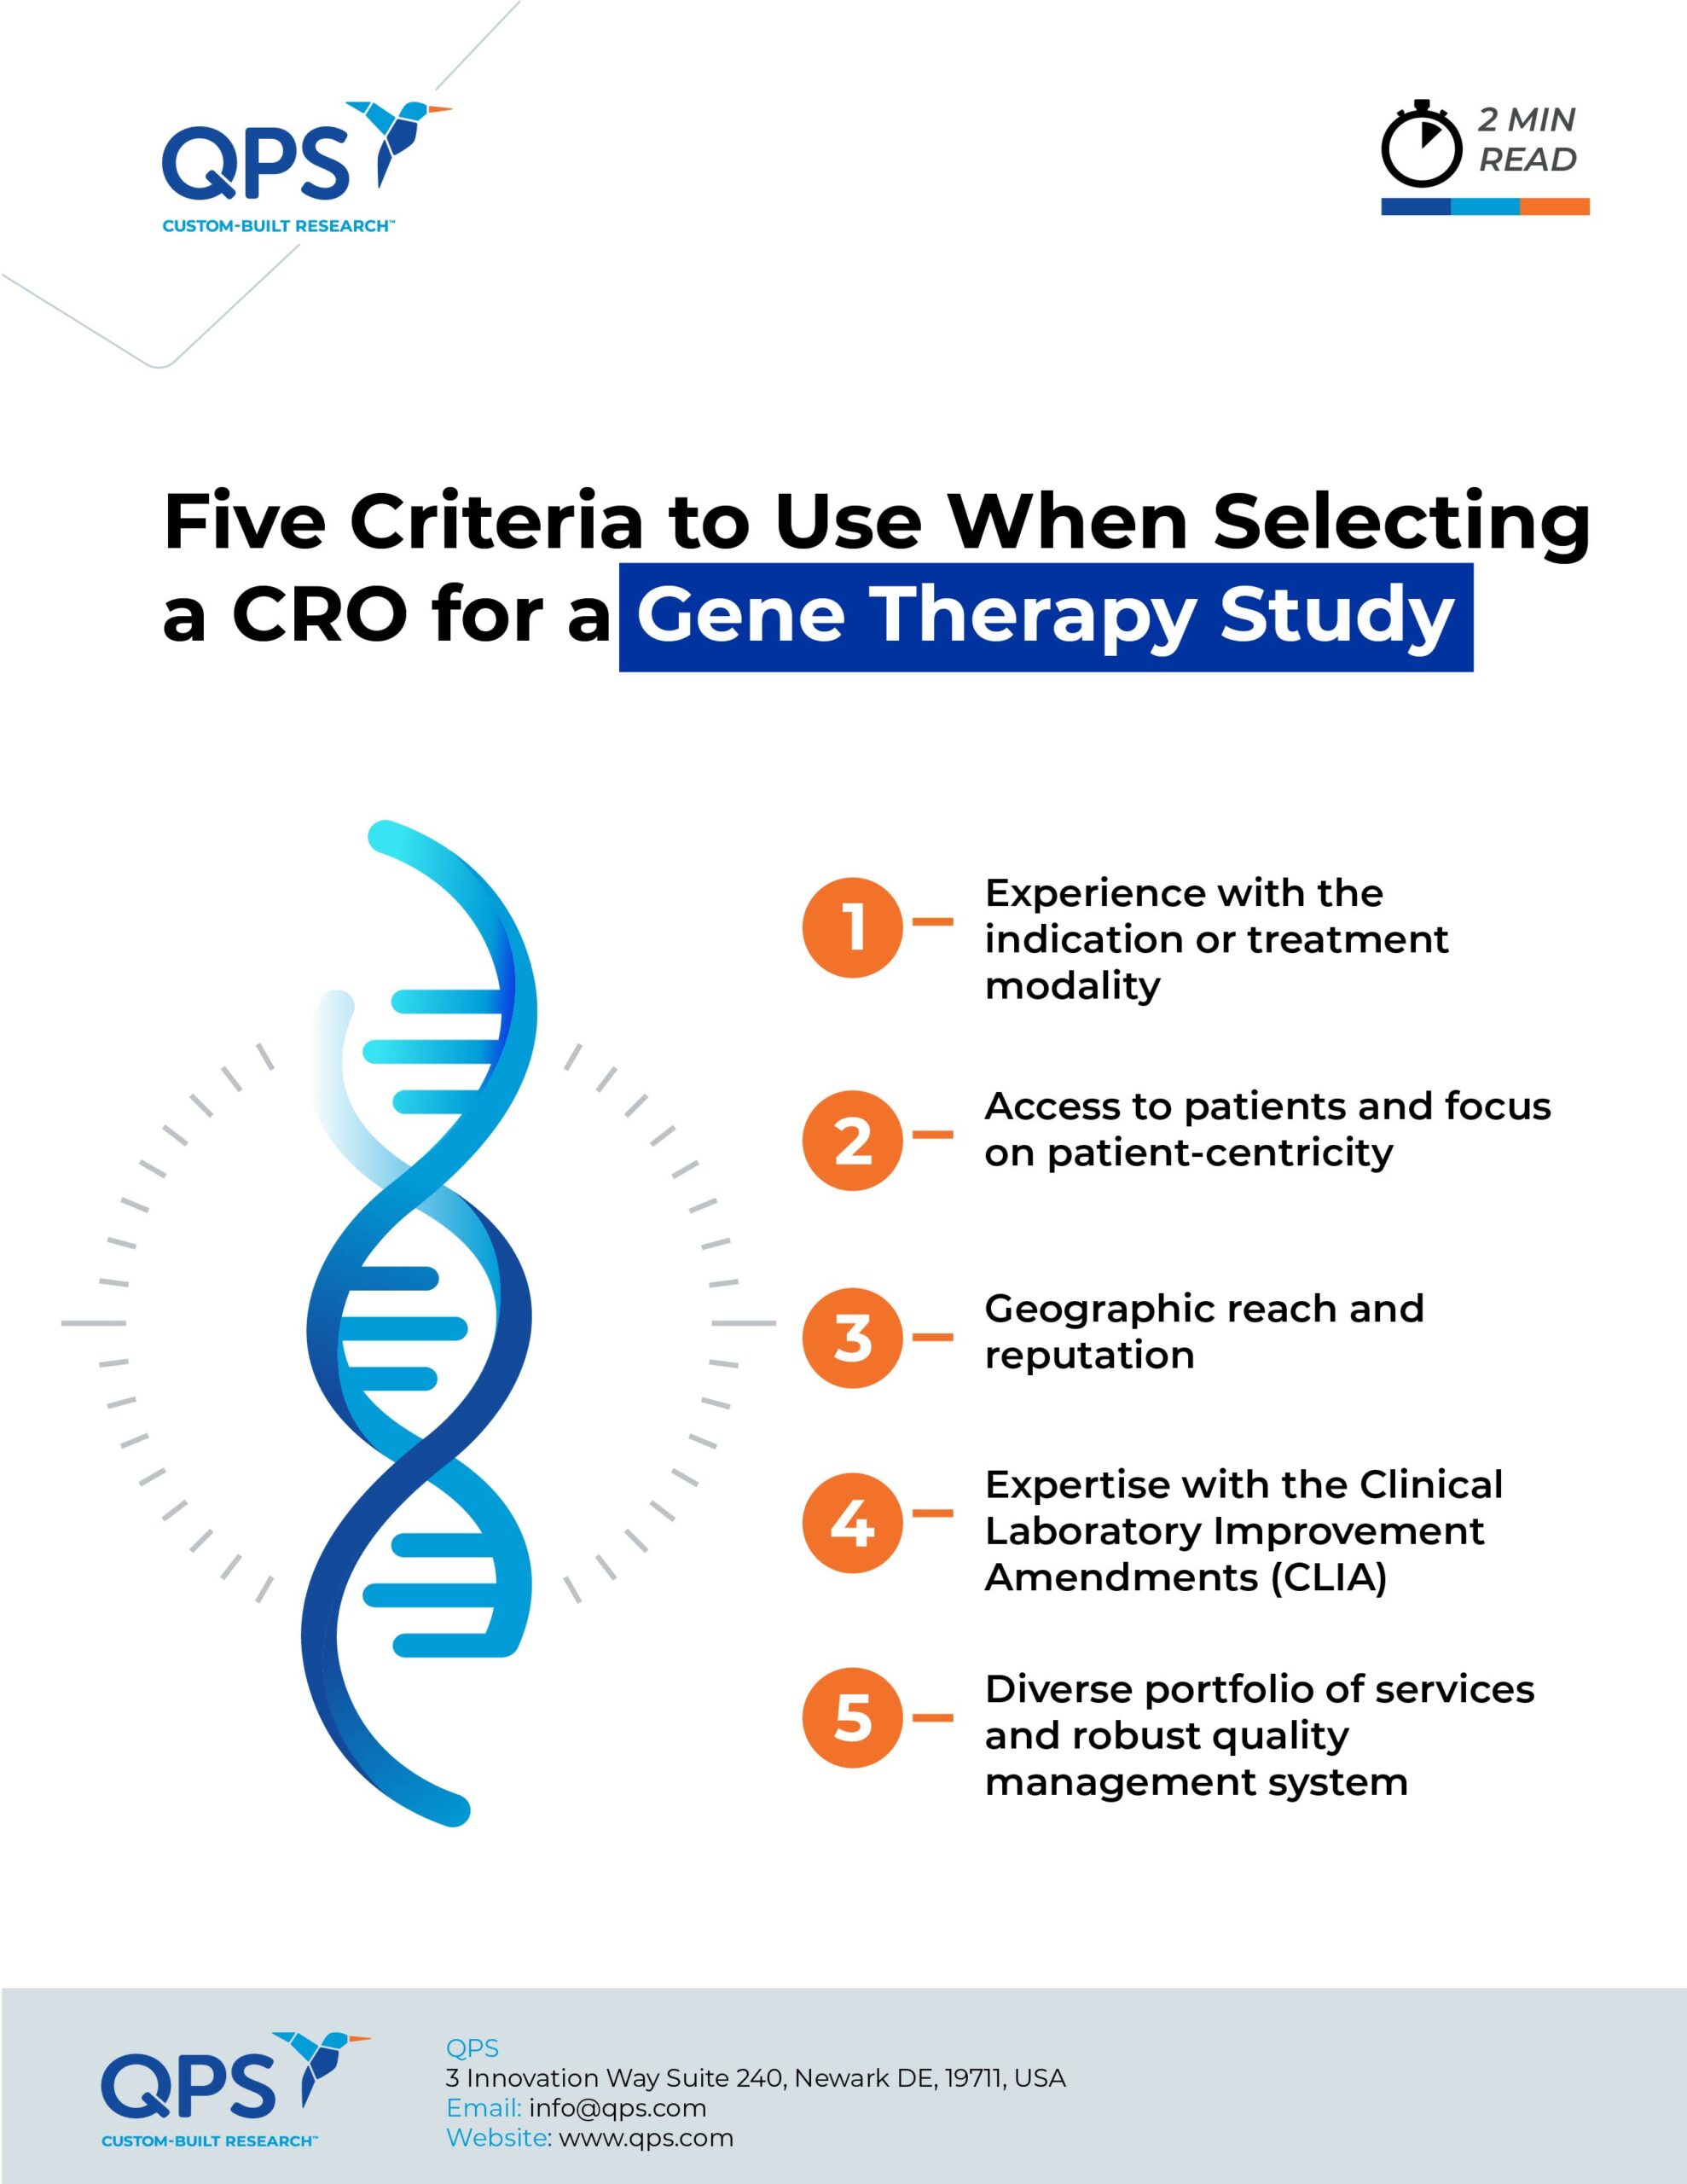 5 Criteria to Use When Selecting a CRO for a Gene Therapy Study